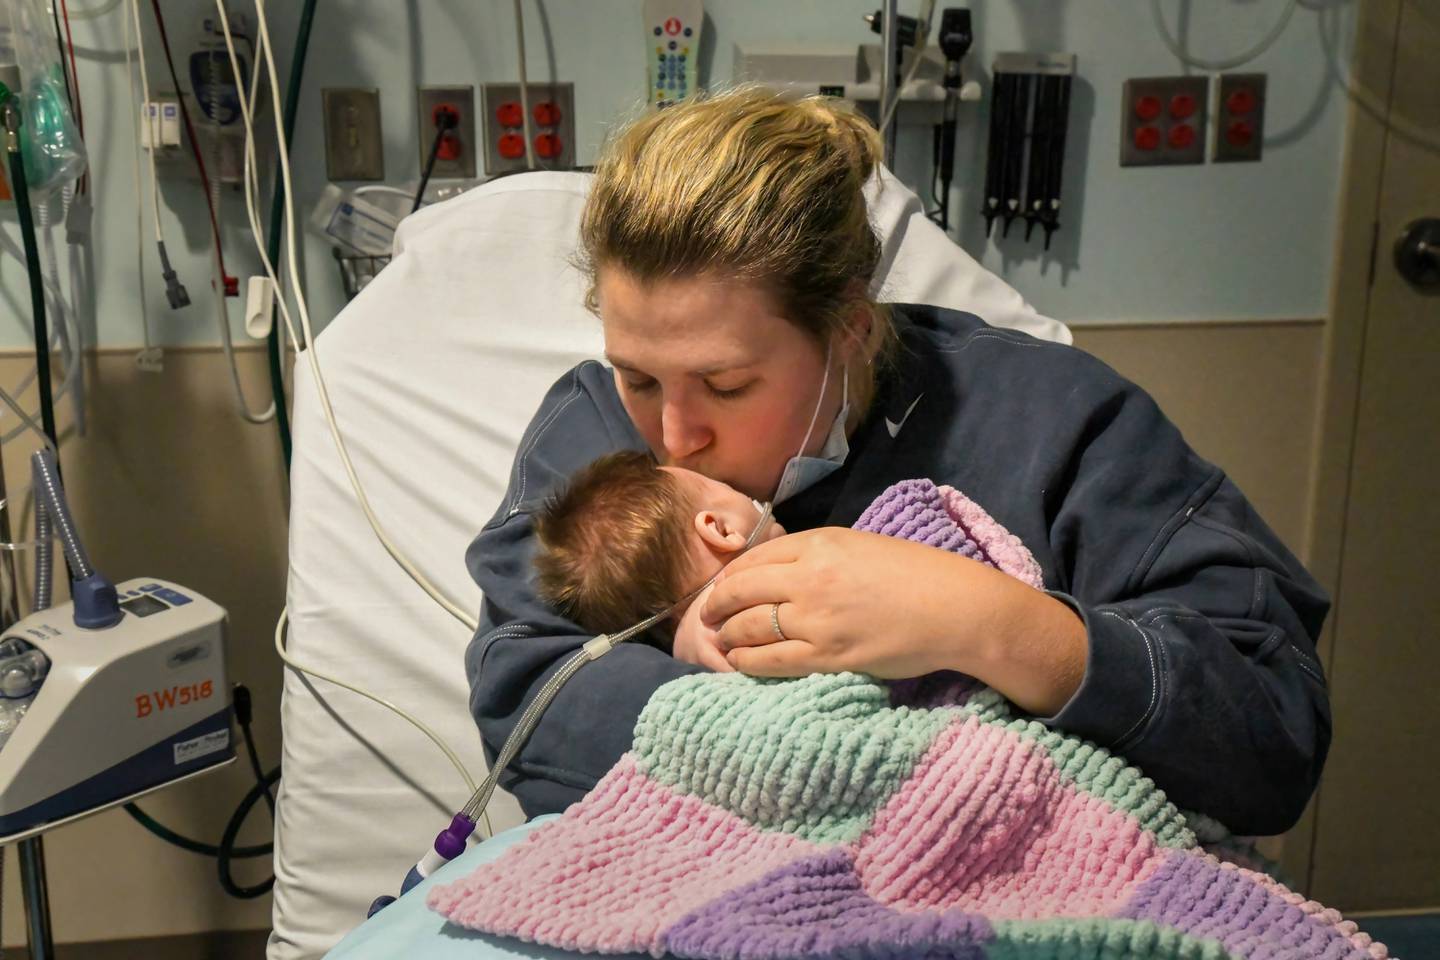 Caitlyn Houston kisses her infant daughter, Parker, as they wait in the emergency department for a hospital bed to open up at Corewell Health Helen DeVos Children's Hospital in Grand Rapids, Michigan, on Dec. 7, 2022.